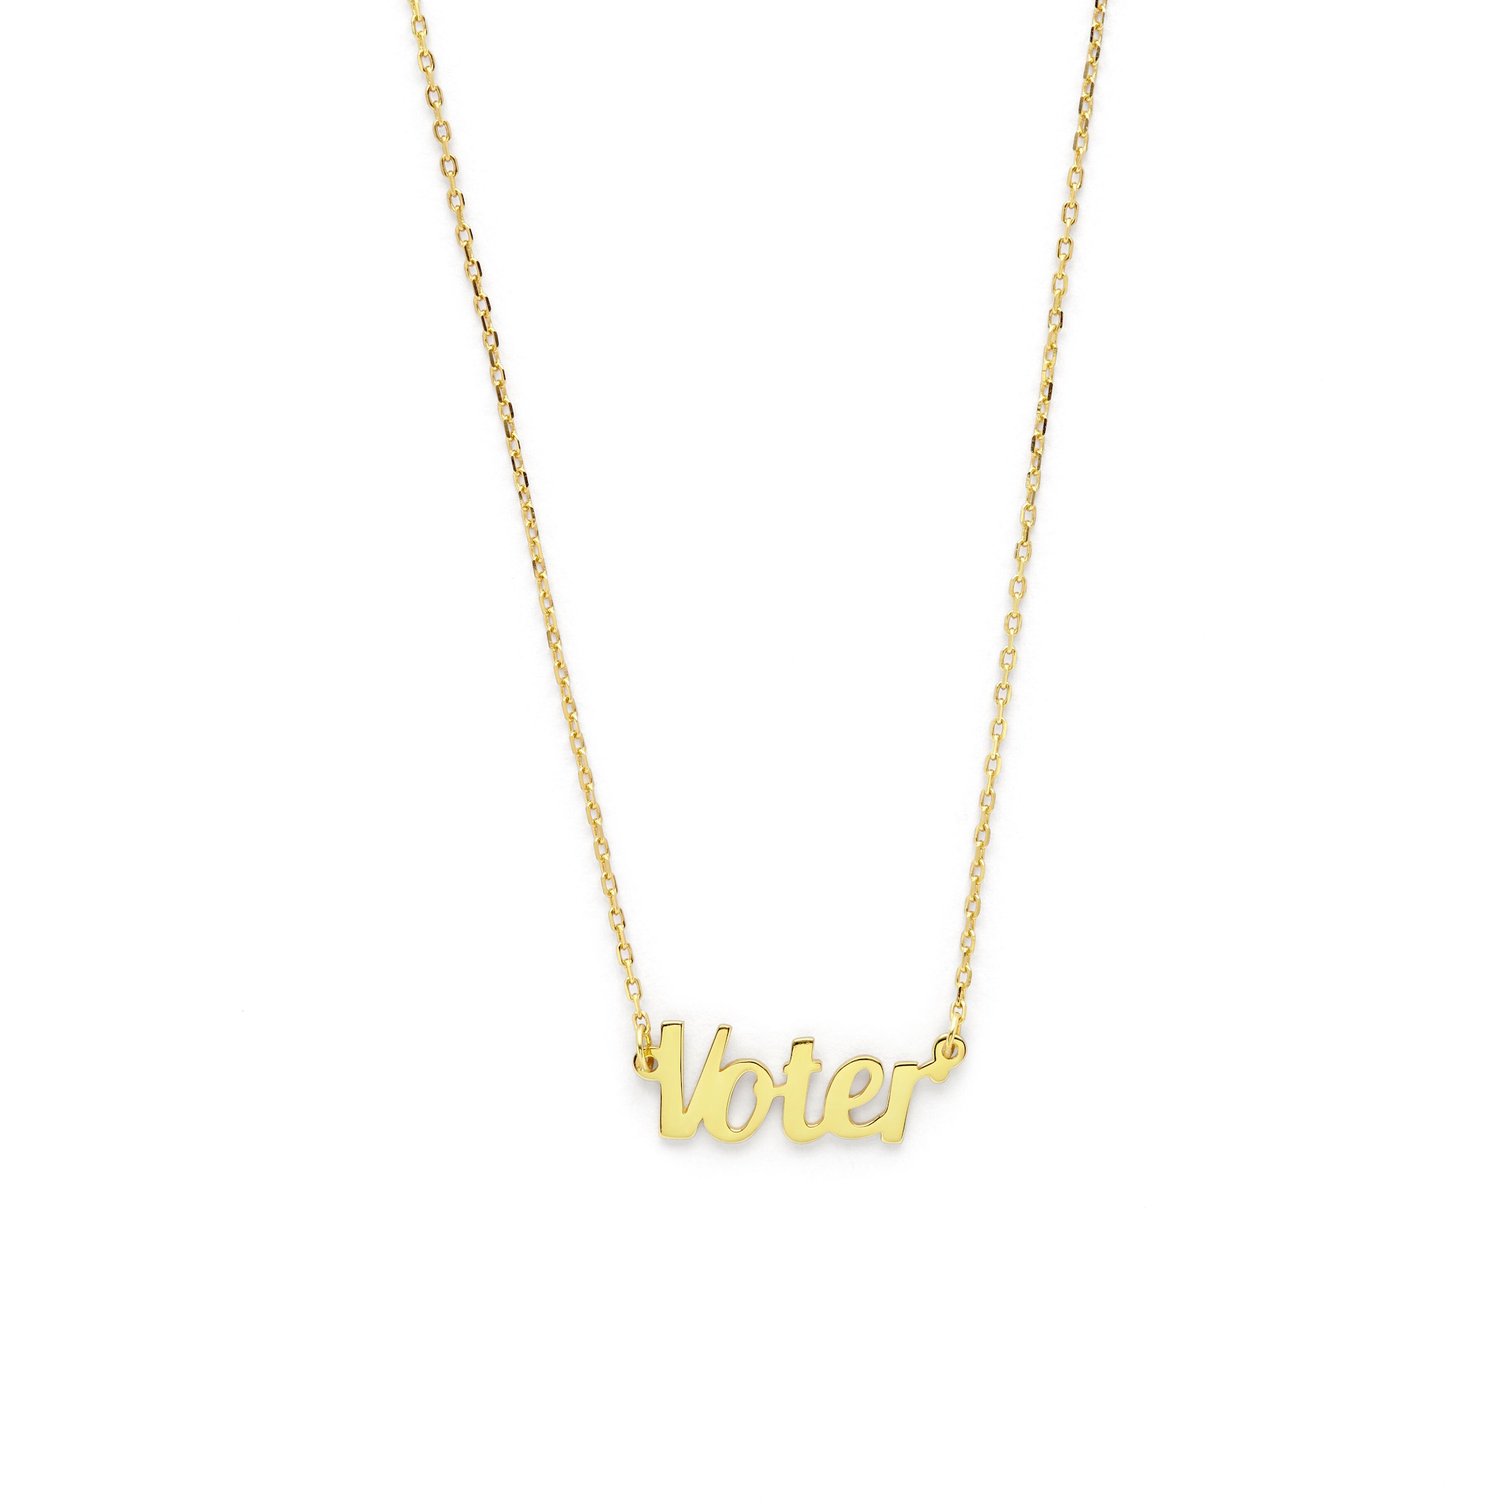 taylor swift voter necklace